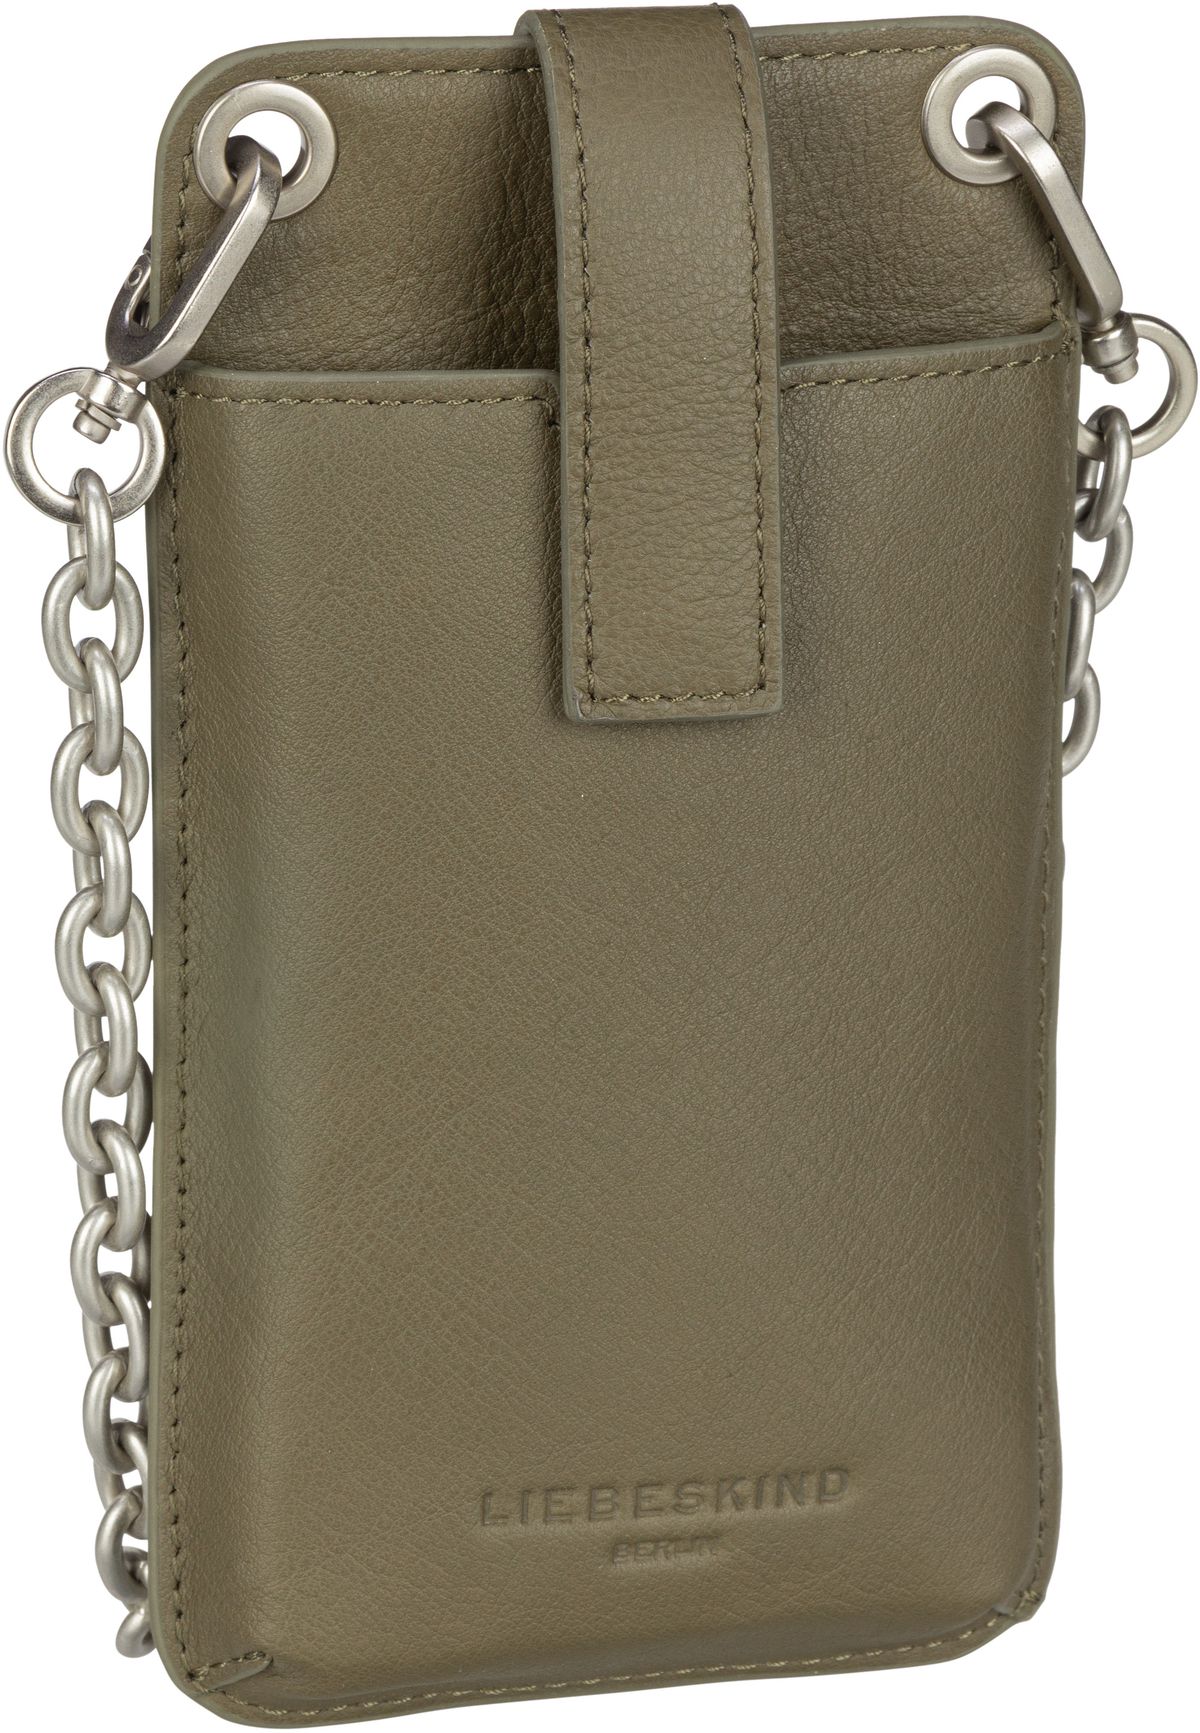 Liebeskind Berlin Basic Mobile Pouch - Olive Paste